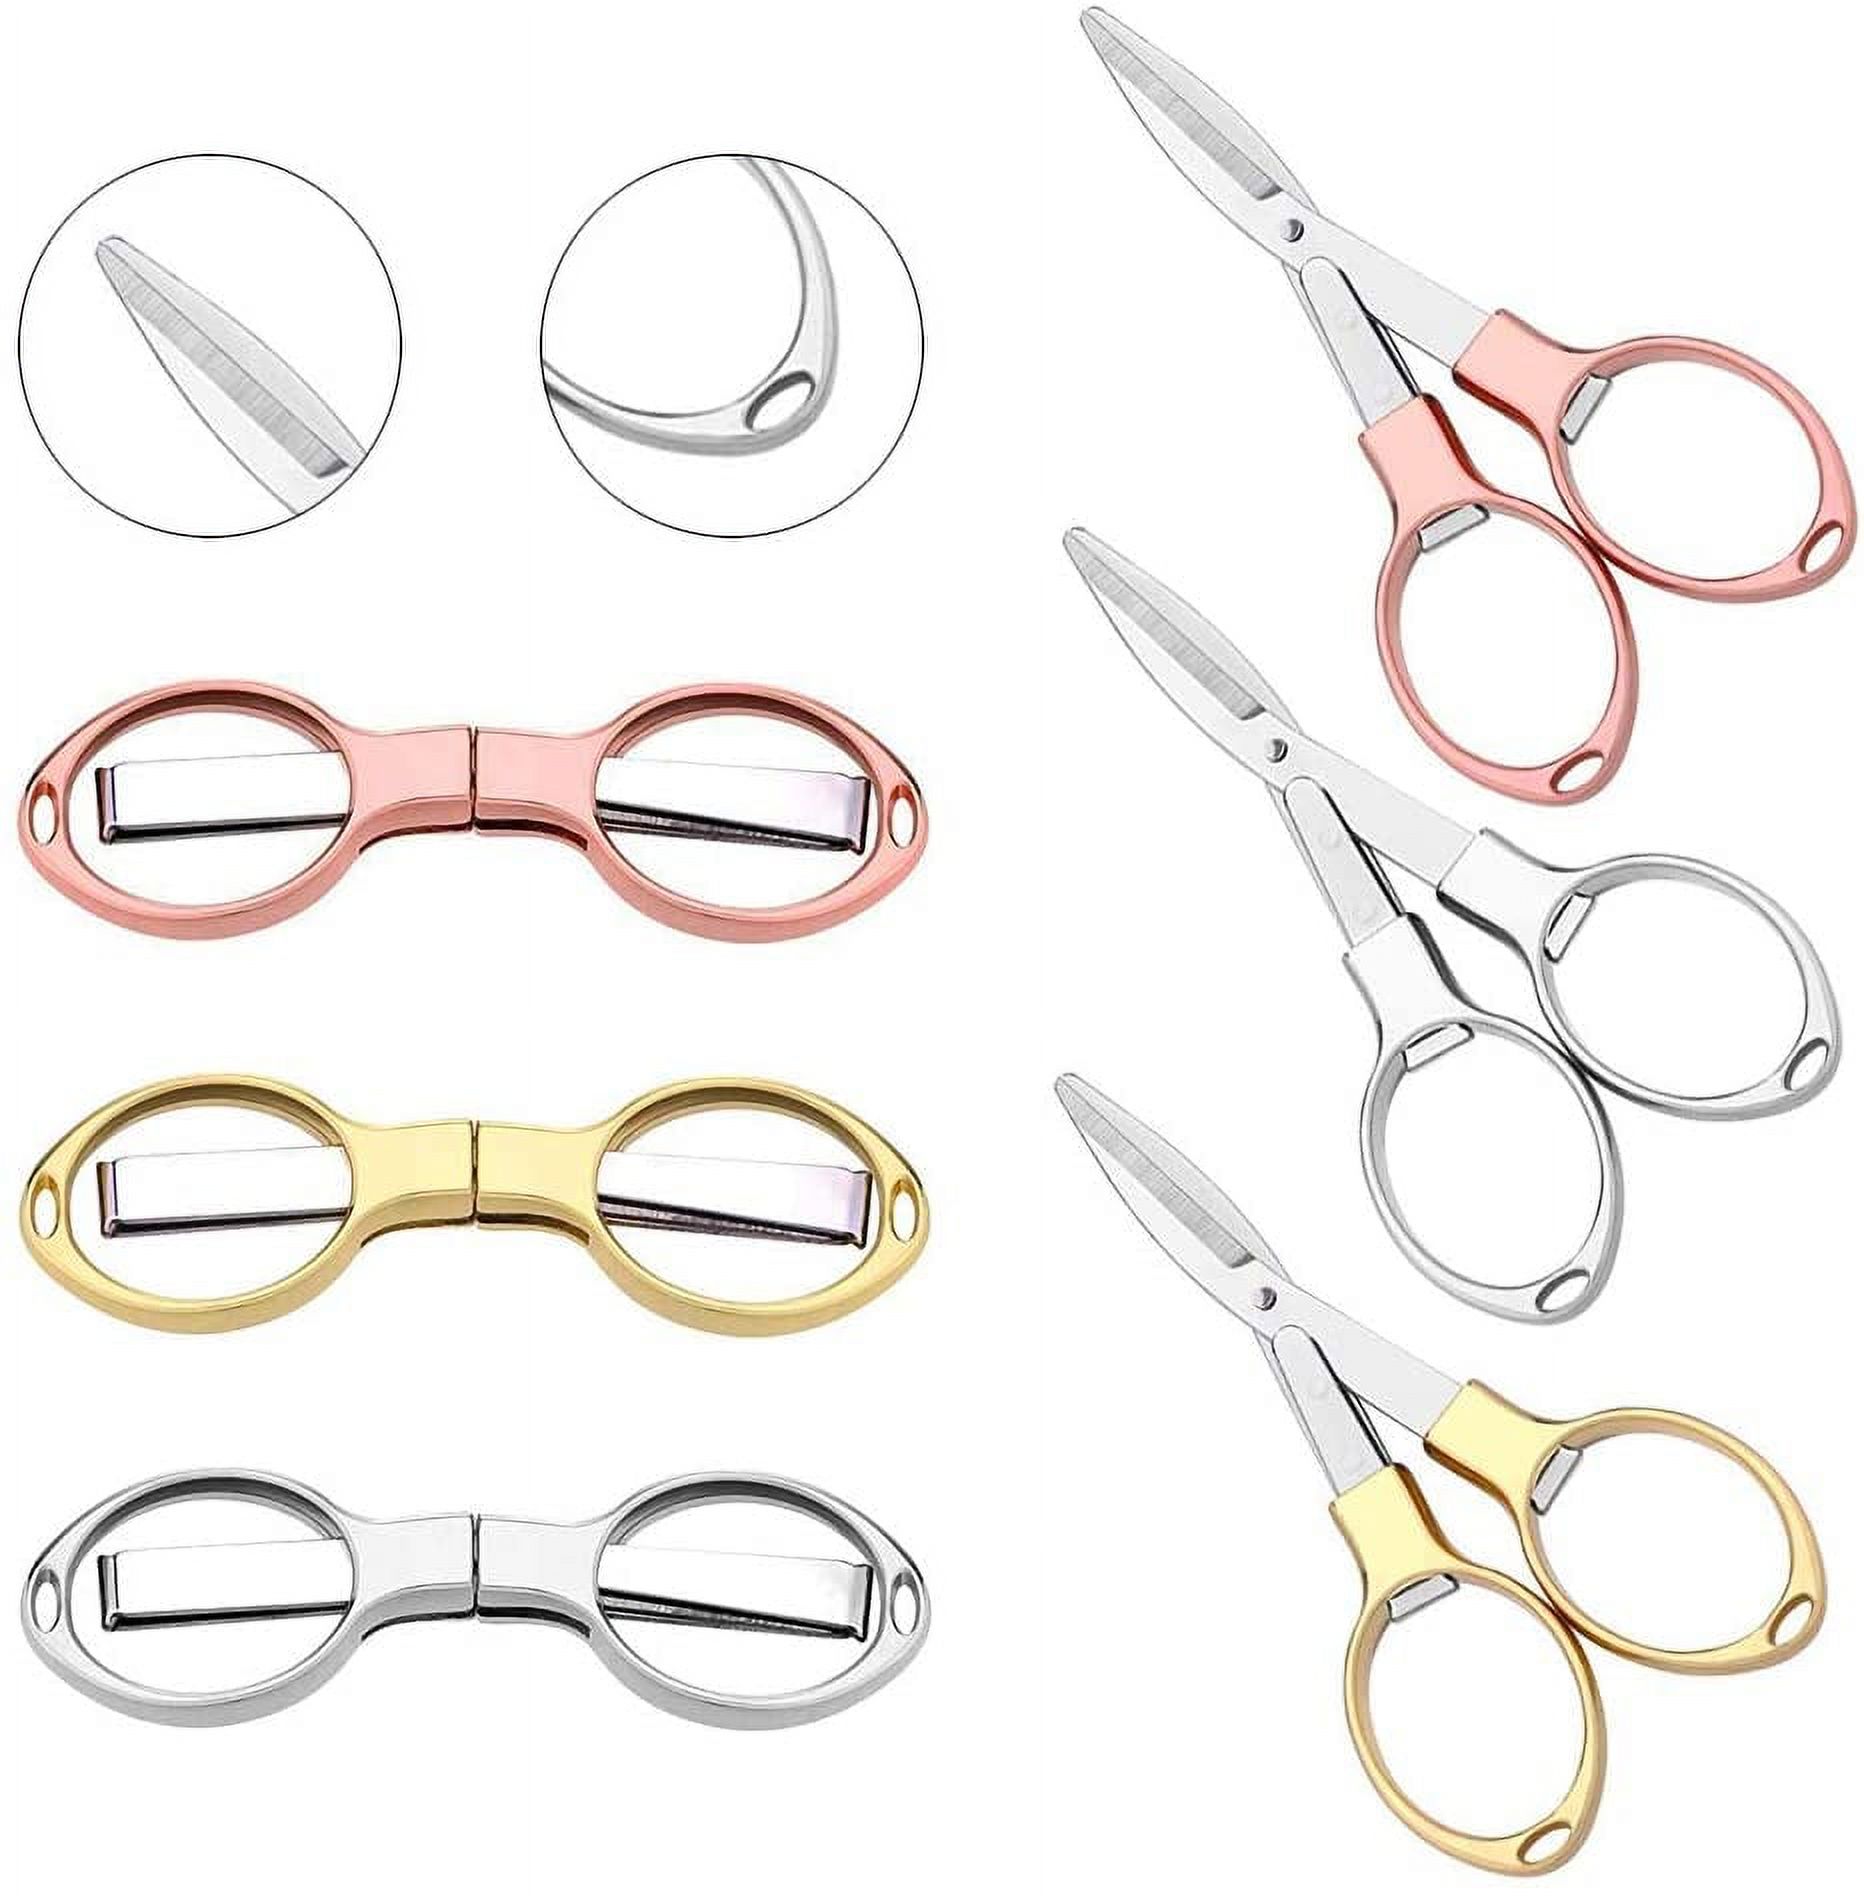 6PCS Folding Scissors, Portable Stainless Steel Travel Scissors,  Glasses-Shaped Mini Shear with 3 Colors for Home Office Friends Families (  Rose Gold, Gold, Silver) 